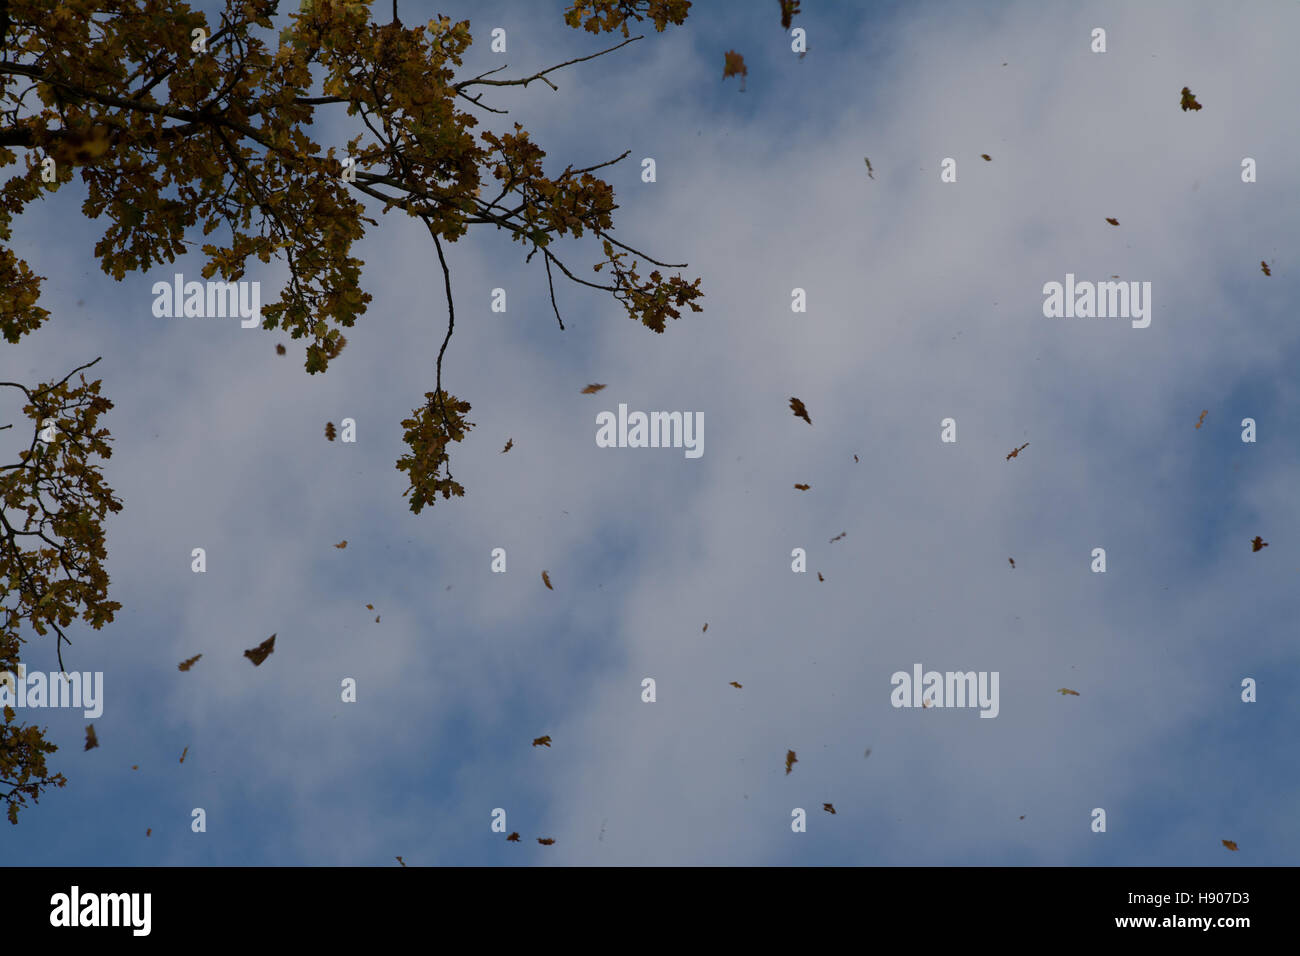 Autumn leaves being blown off of tree during windy weather Stock Photo